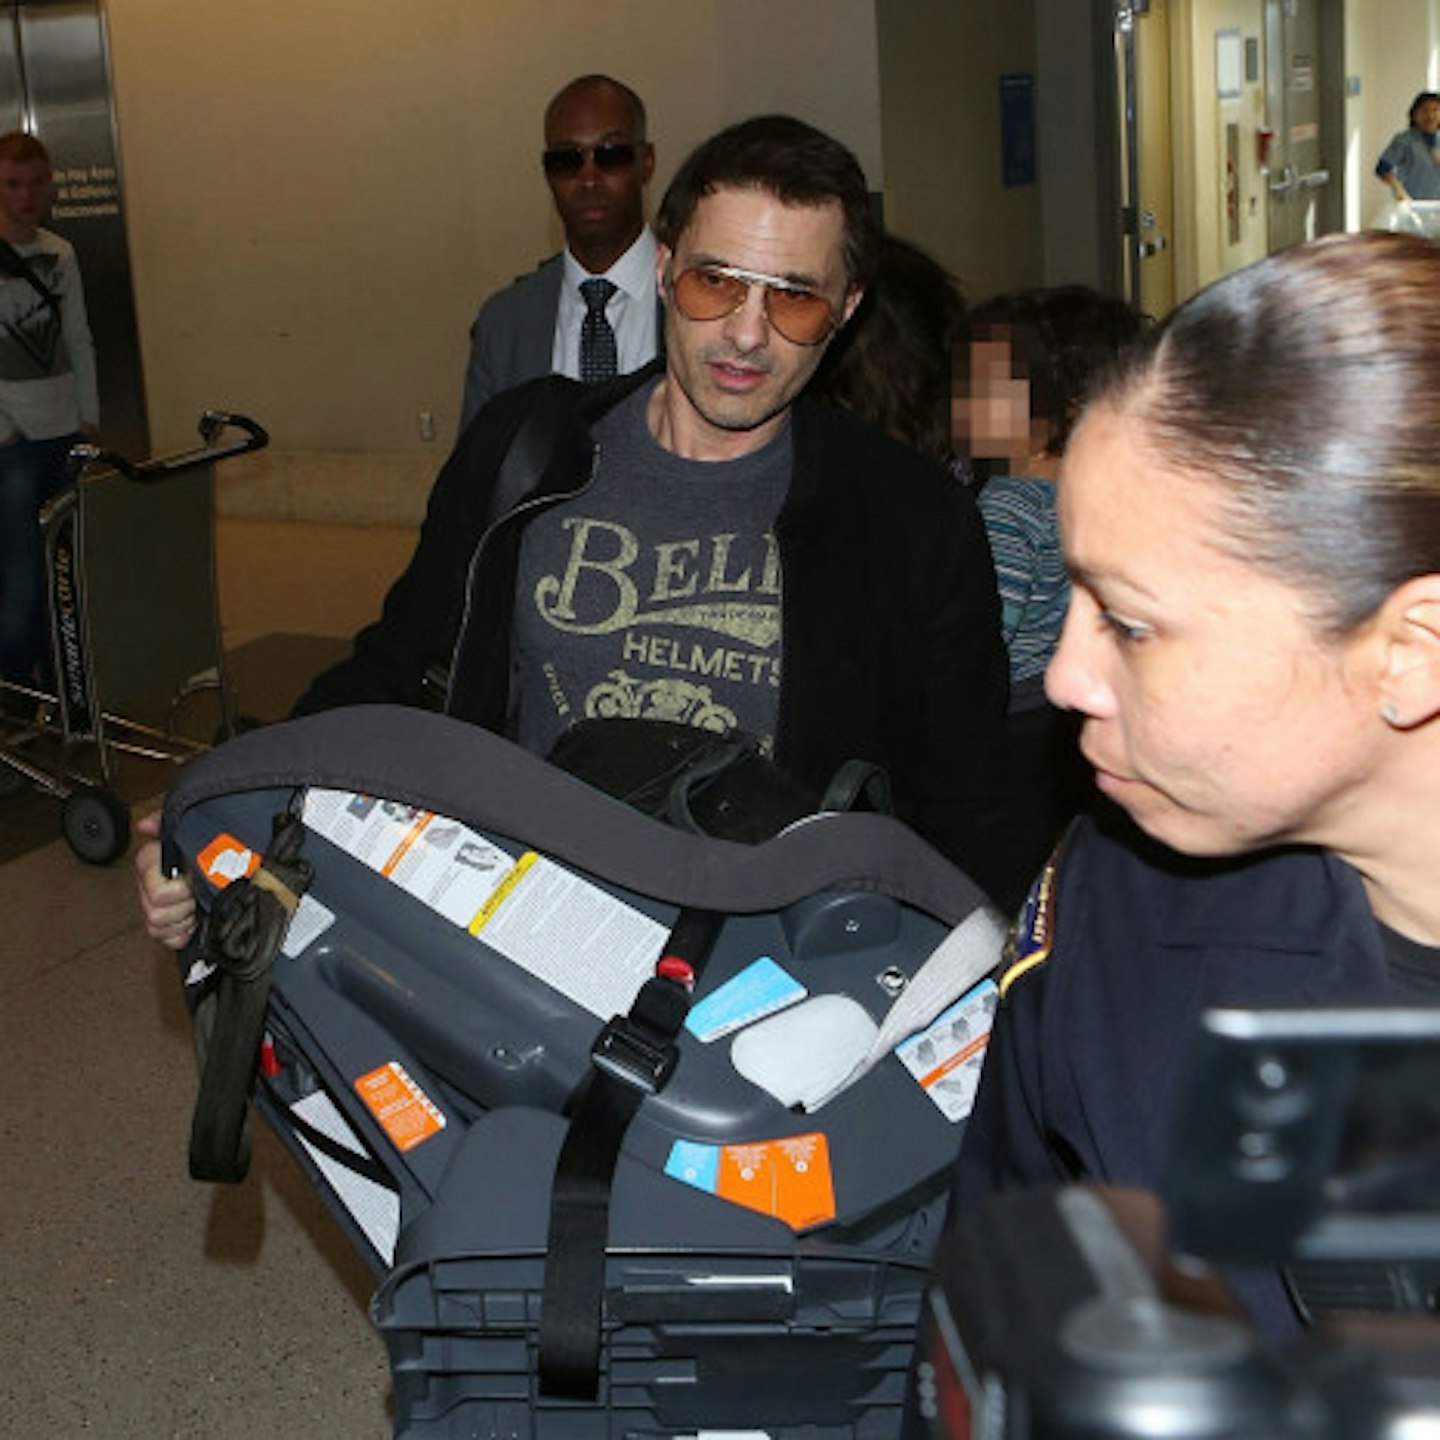 Olivier and Halle behind him at LAX